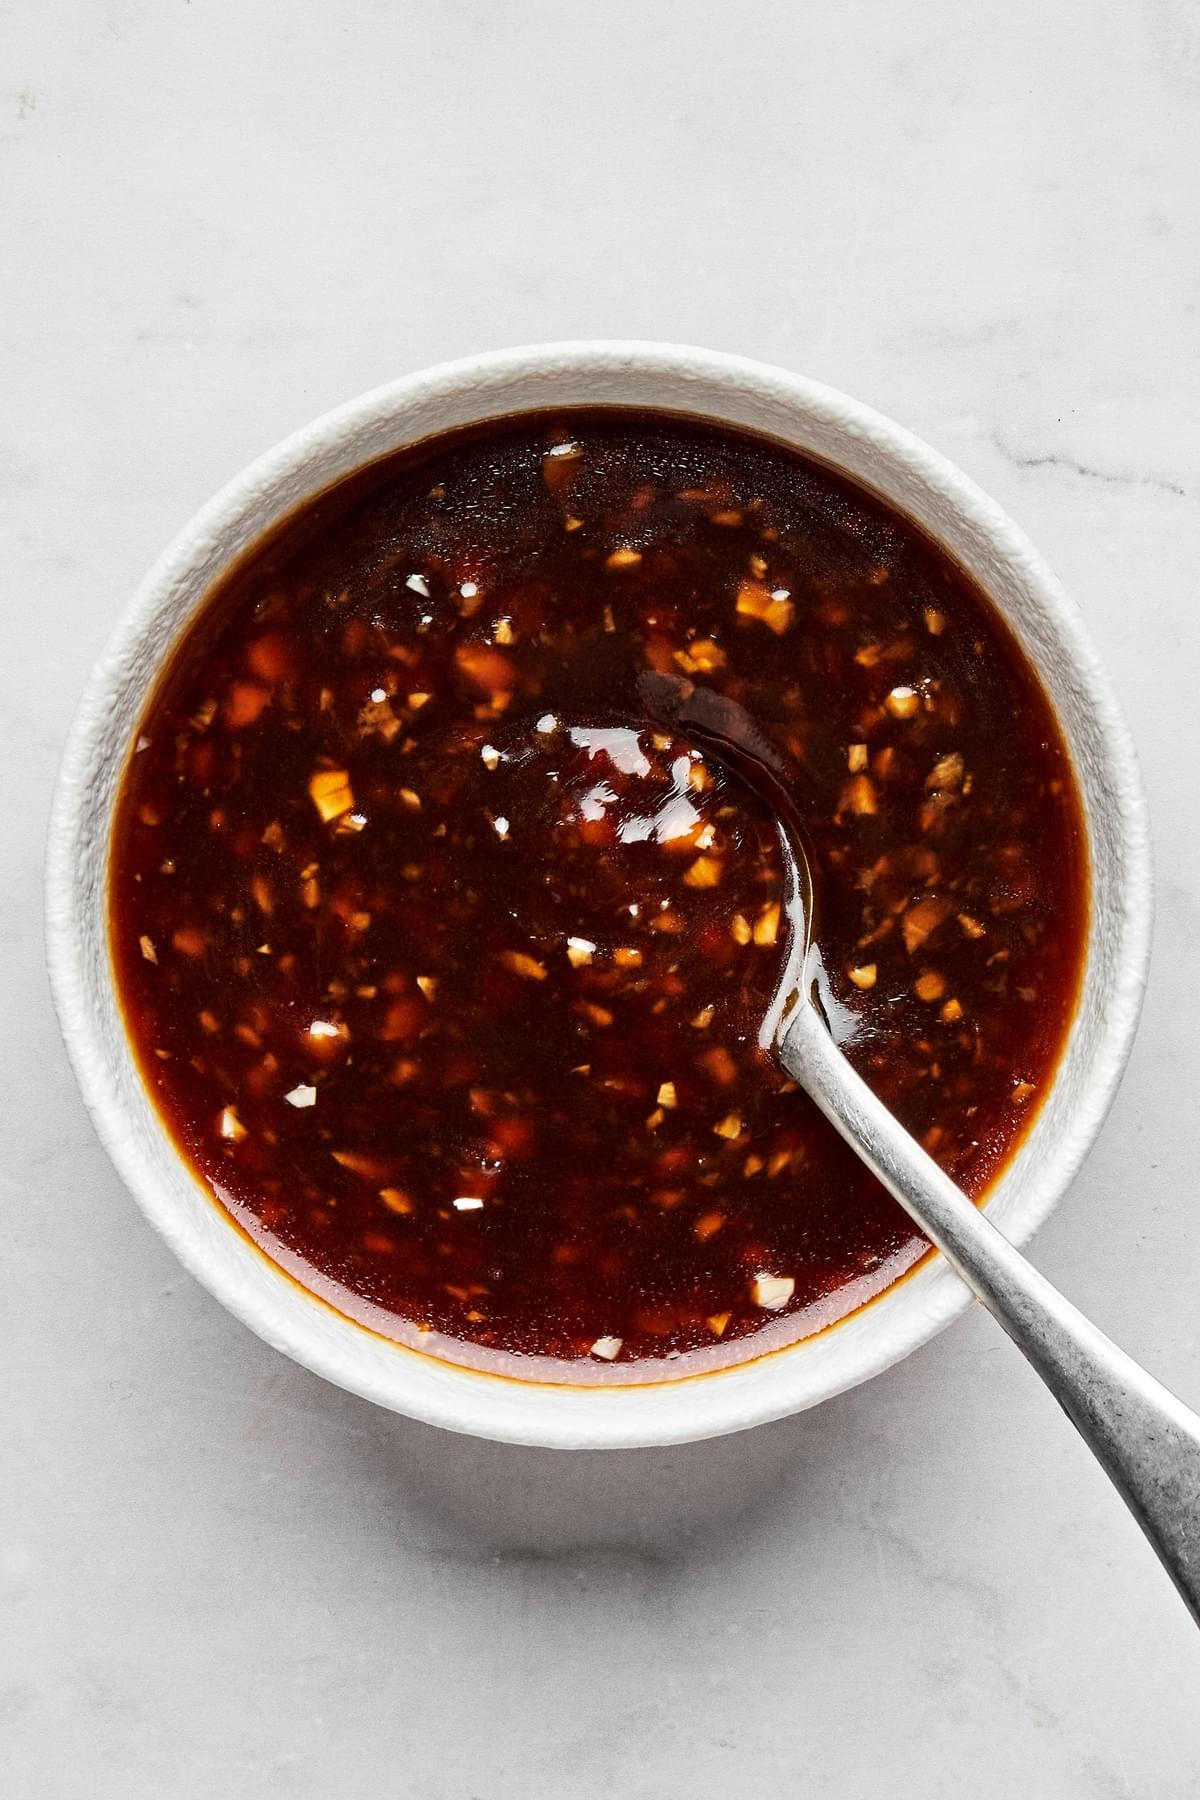 homemade stir fry sauce made with tamari, sesame oil, garlic, ginger, brown sugar, red pepper flakes and cornstarch in a bowl